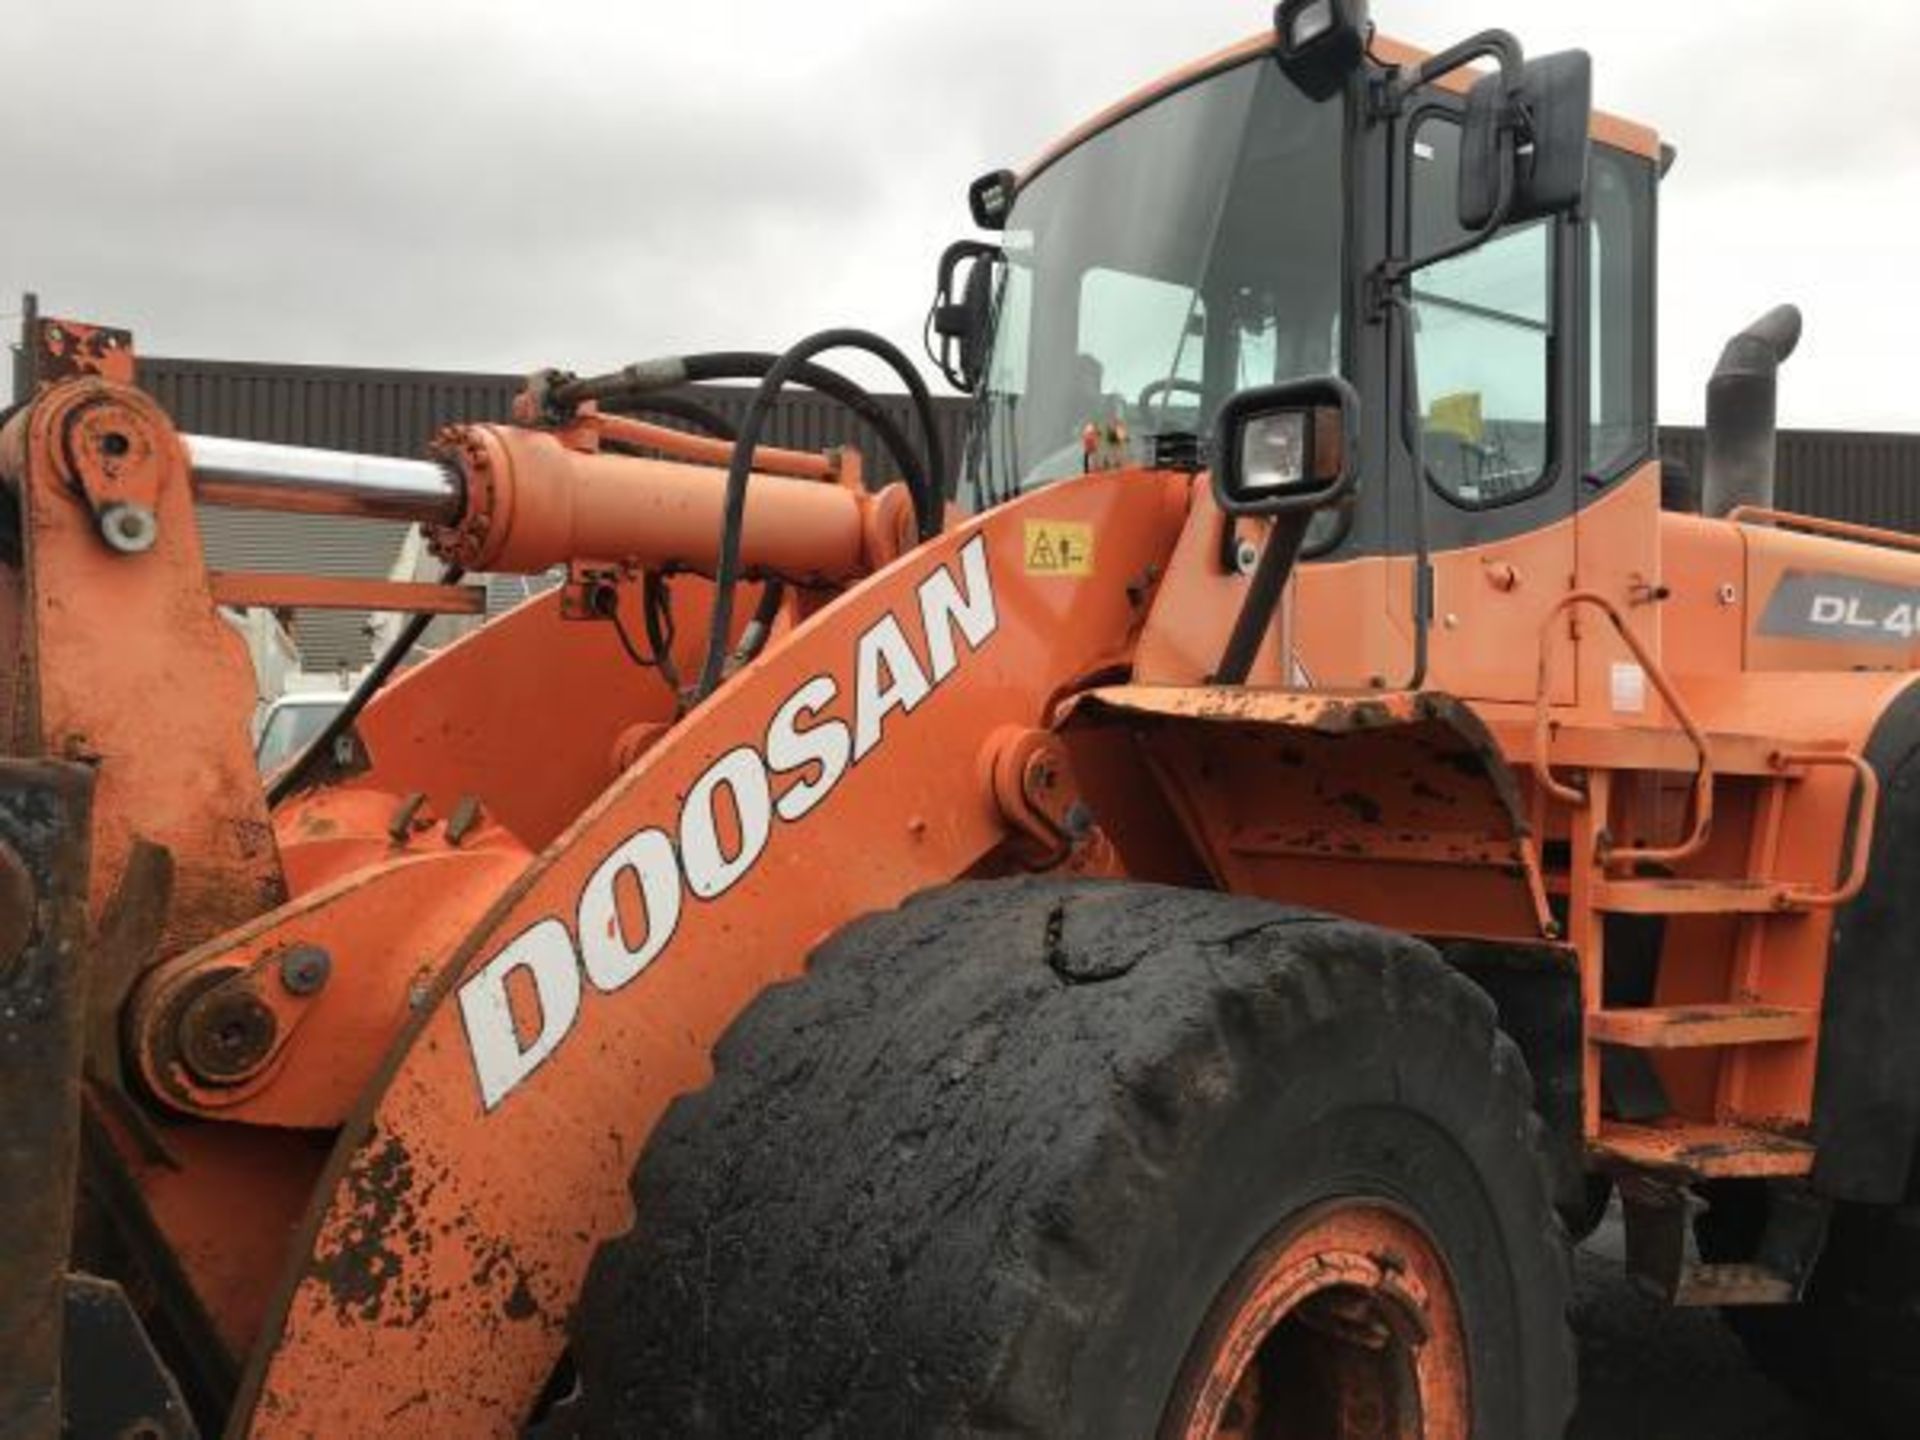 2010 DOOSAN DL400 LOADING SHOVEL 4 IN 1 BUCKET GOOD WORKING ORDER STRAIGHT FROM 1 COMPANY *PLUS VAT* - Image 7 of 17